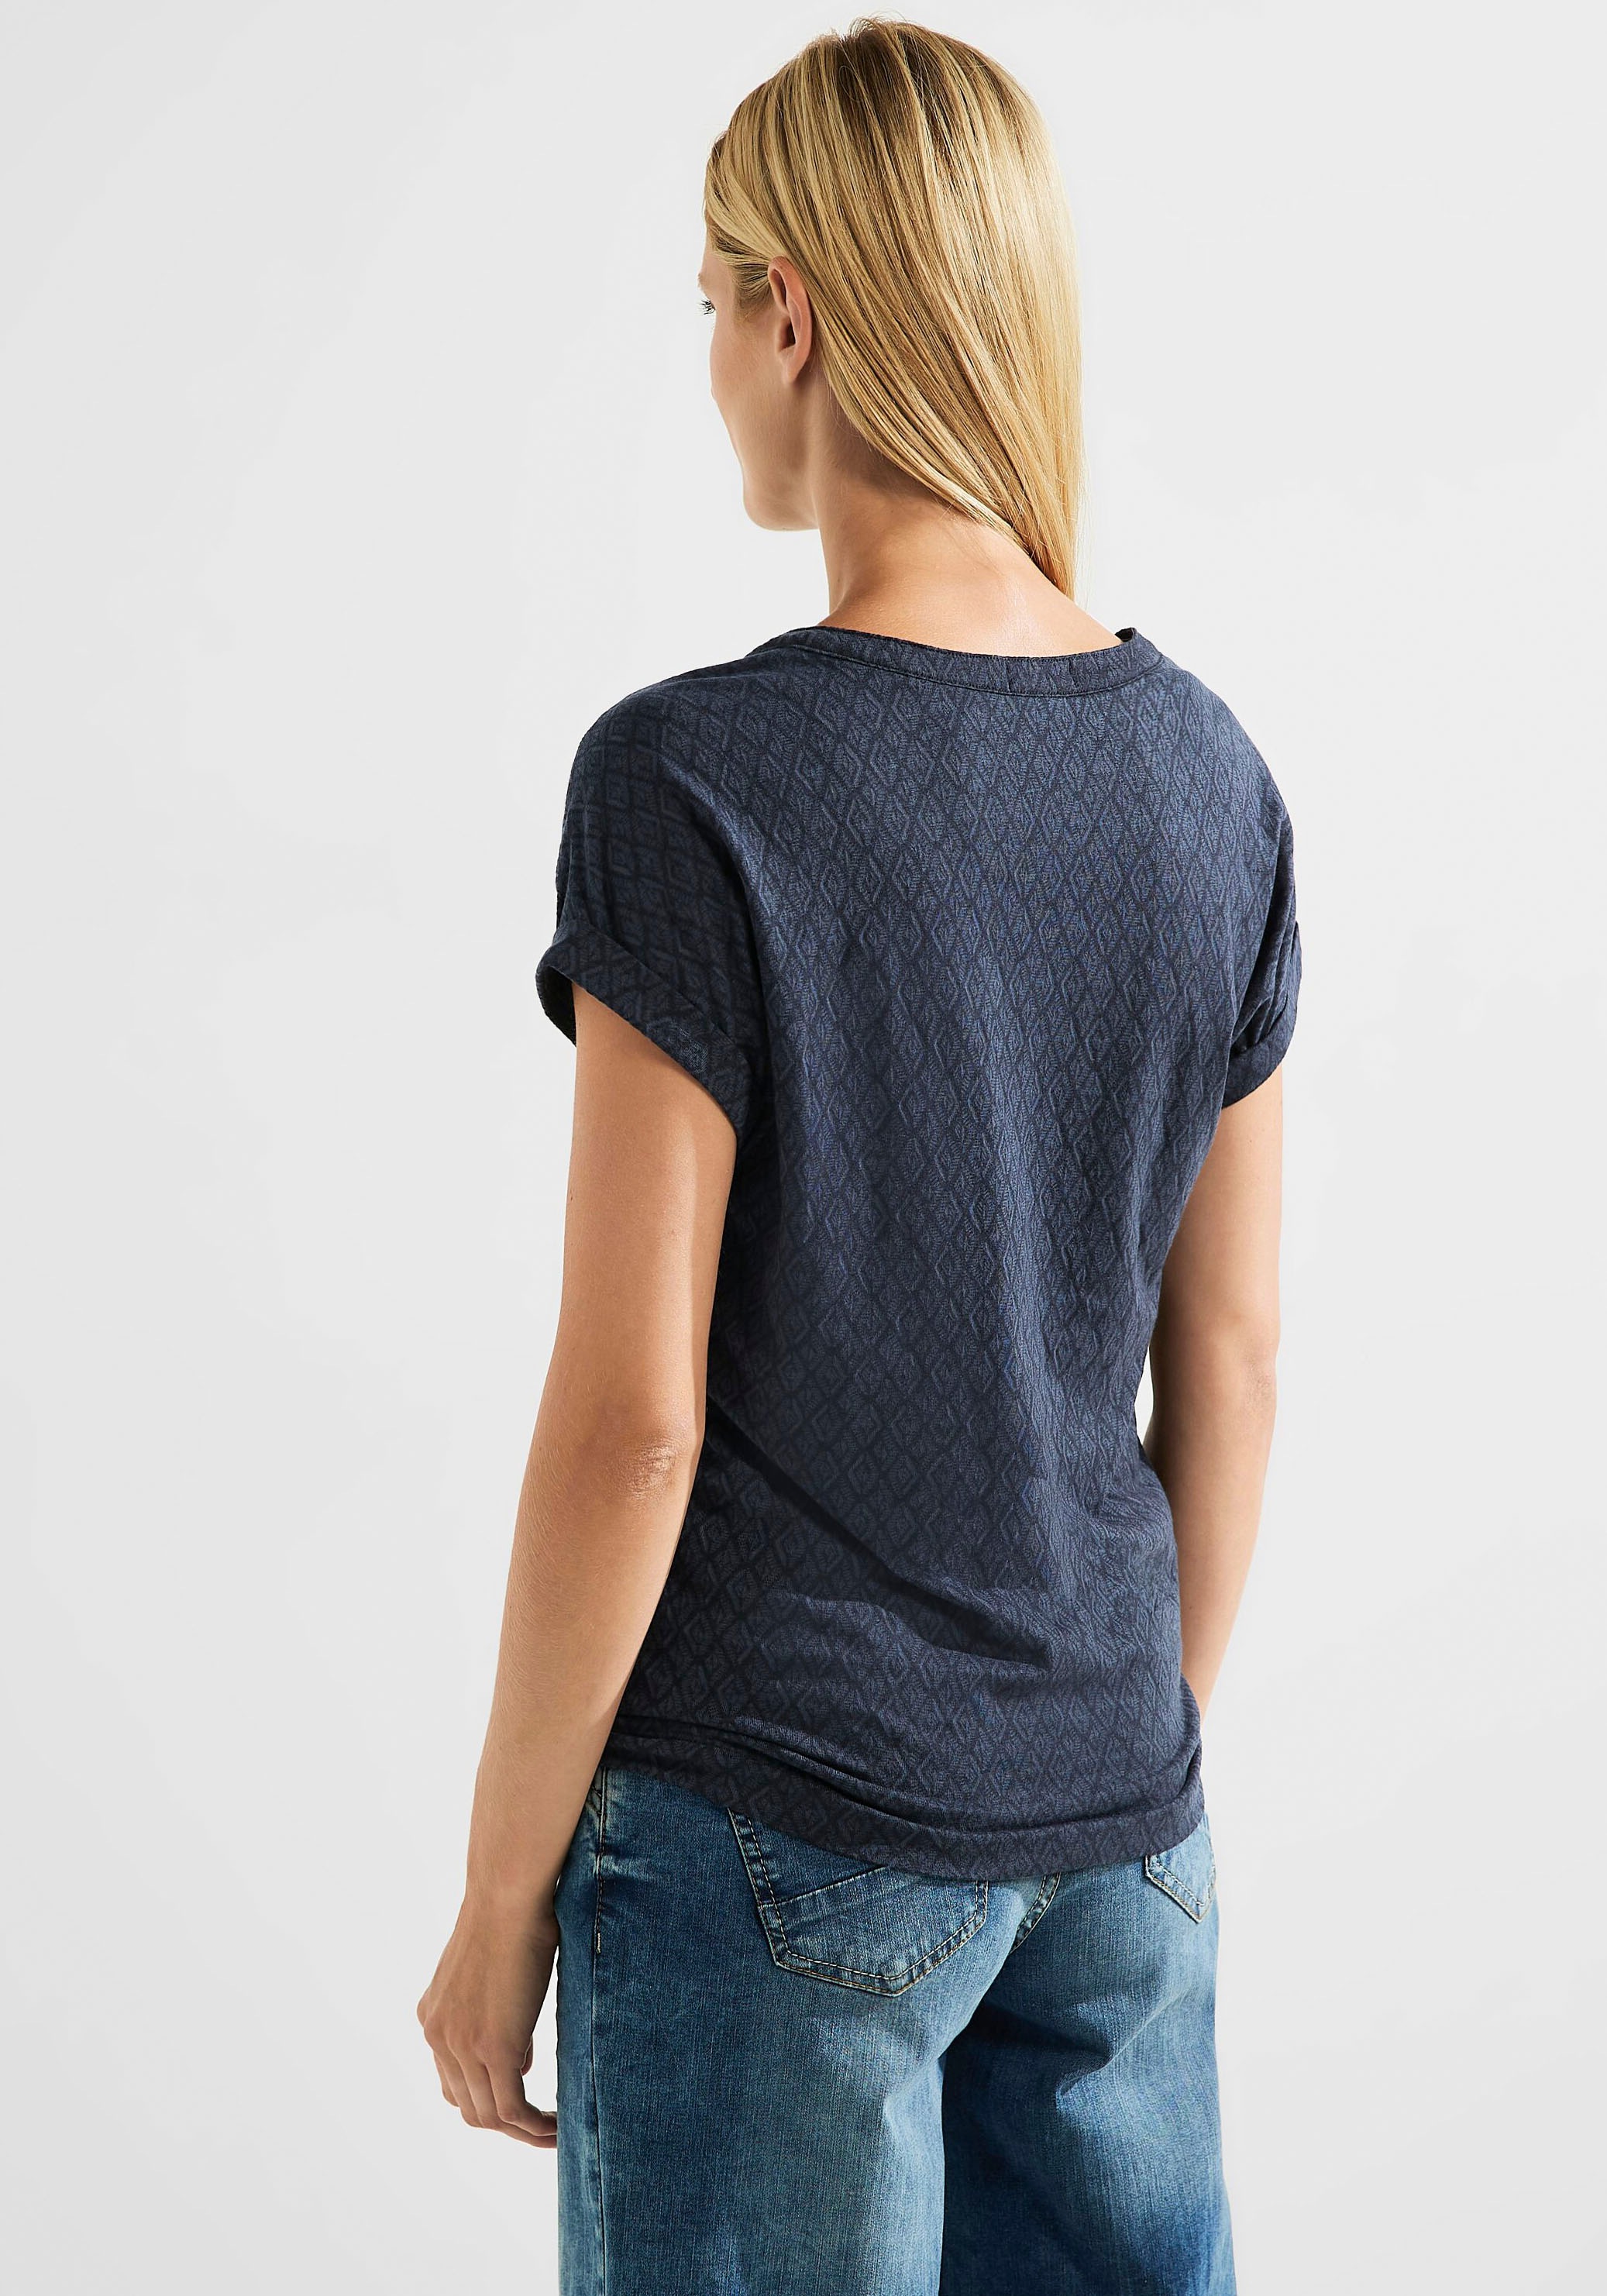 Rhombusform mit bei Allover-Muster Cecil OTTO online in T-Shirt,